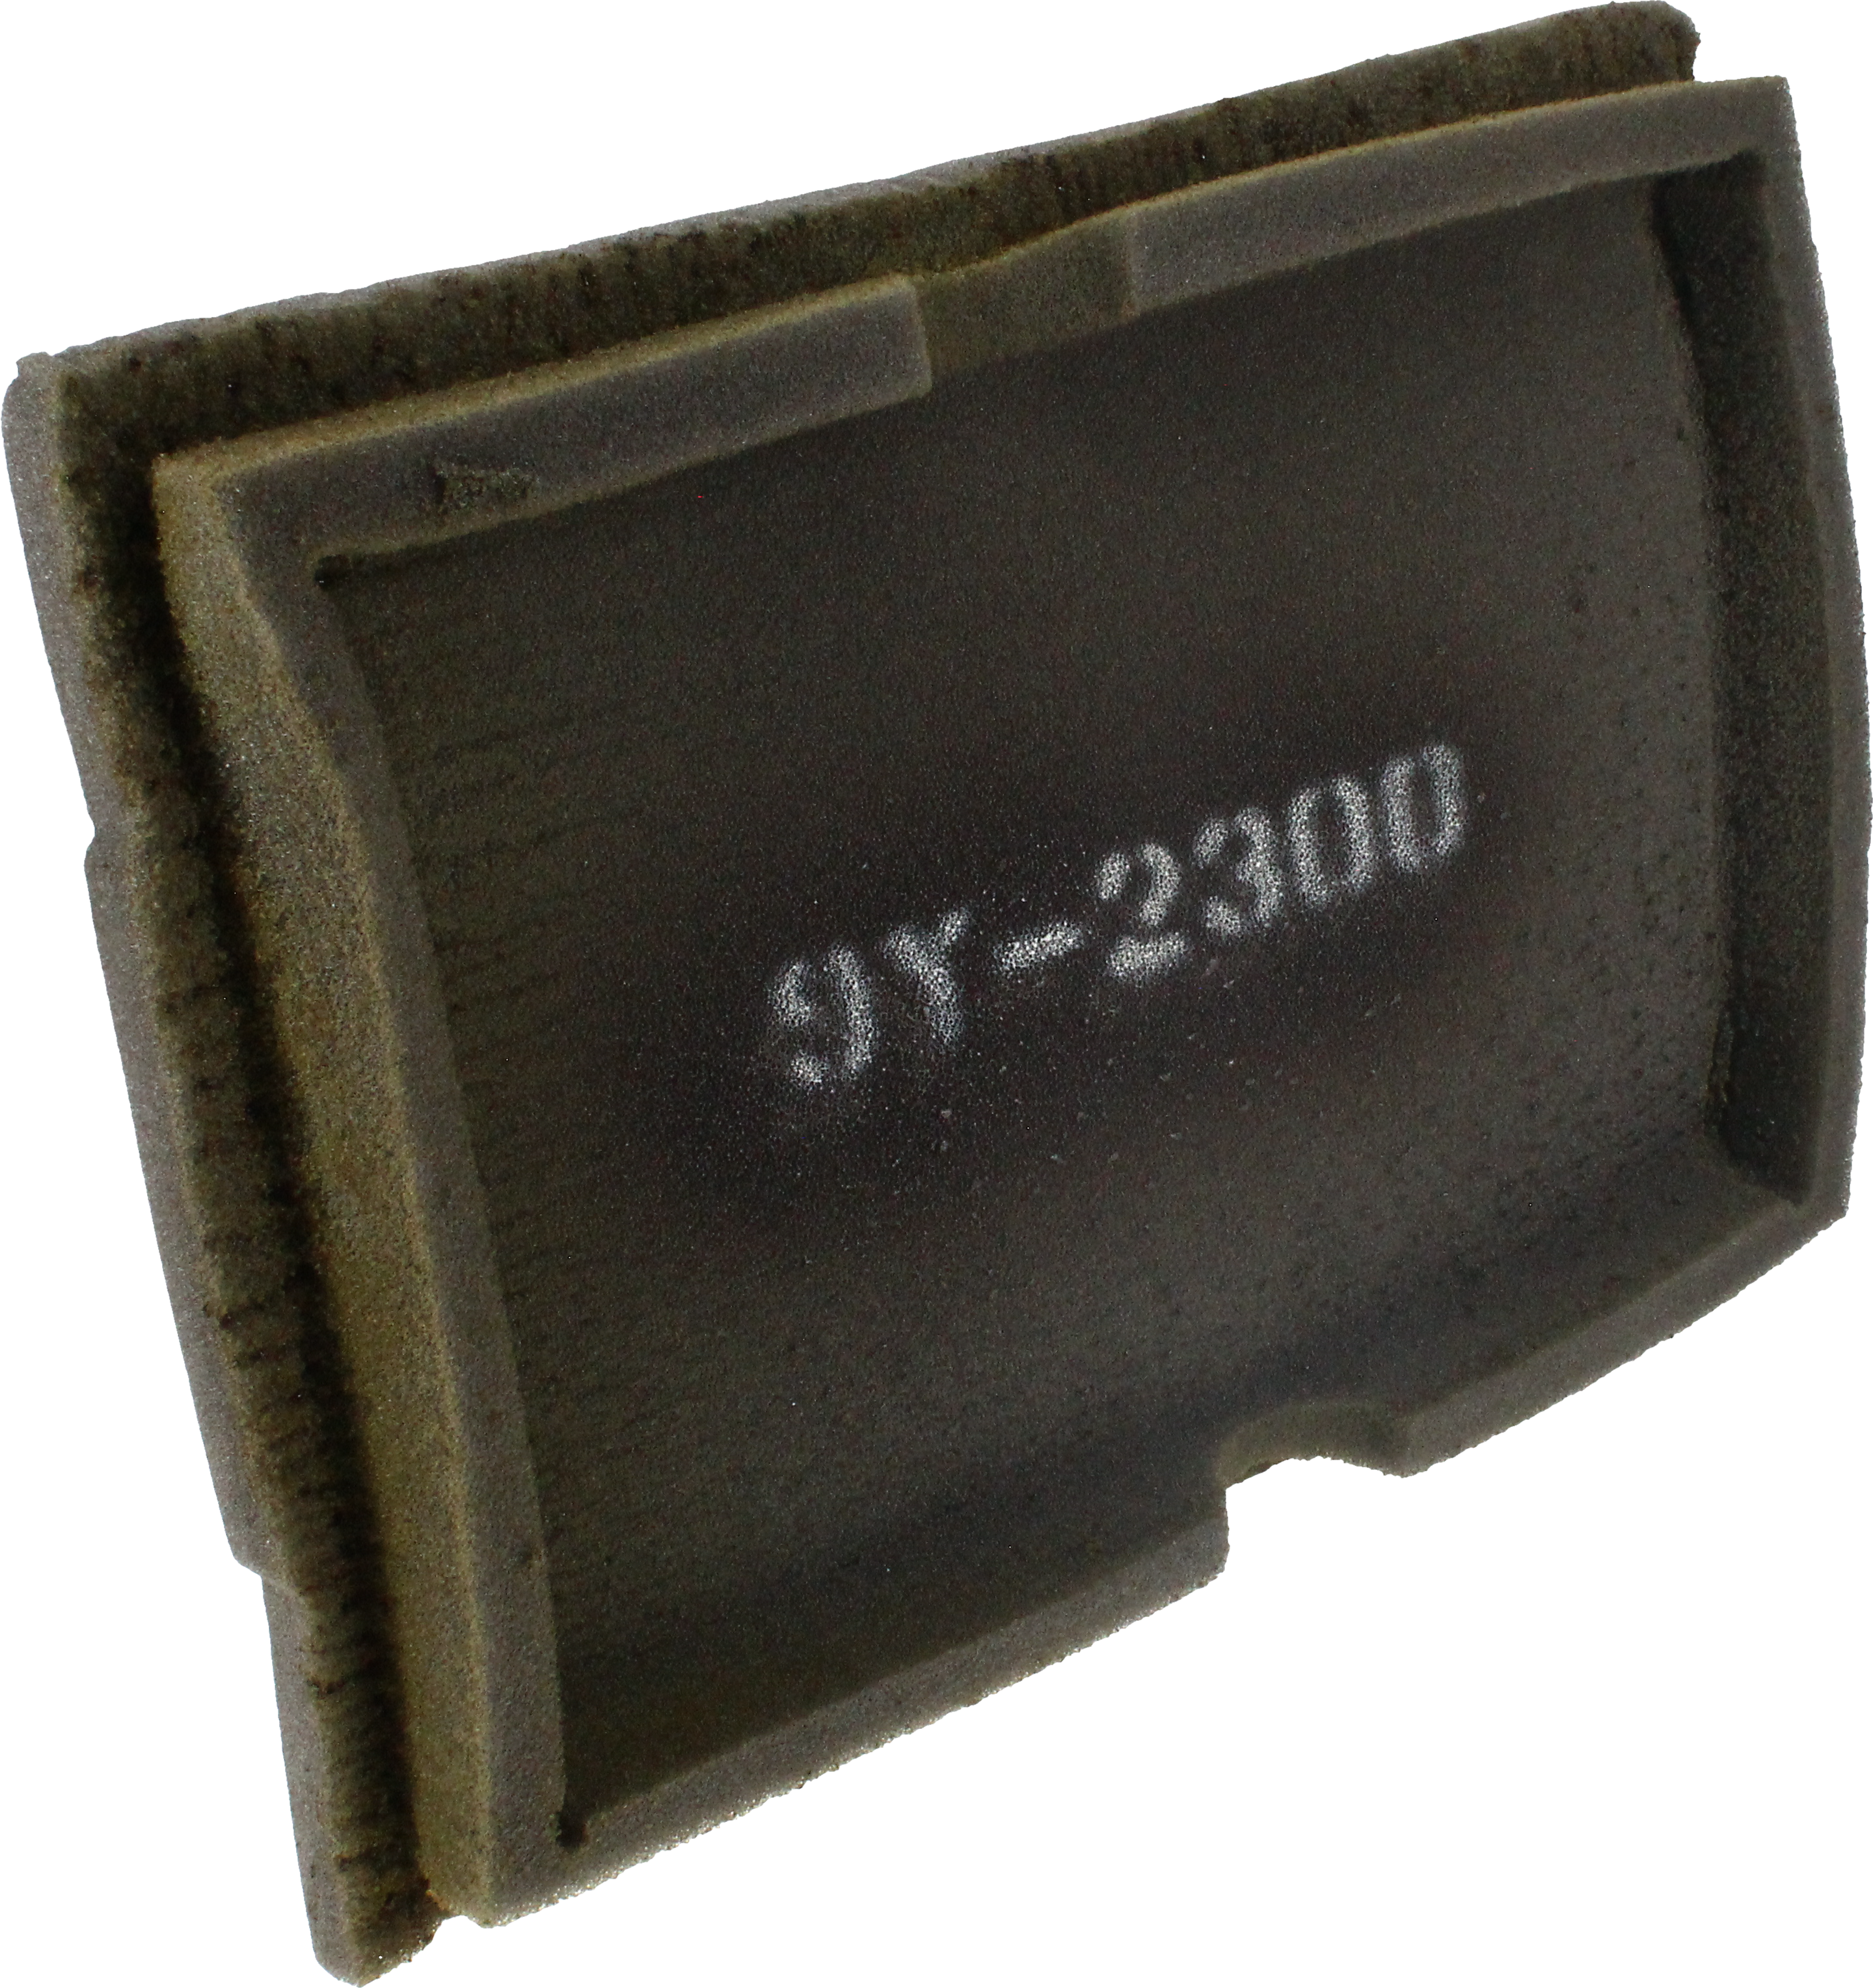 Genuine CAT Air Filter 9Y2300 for 3208 3208